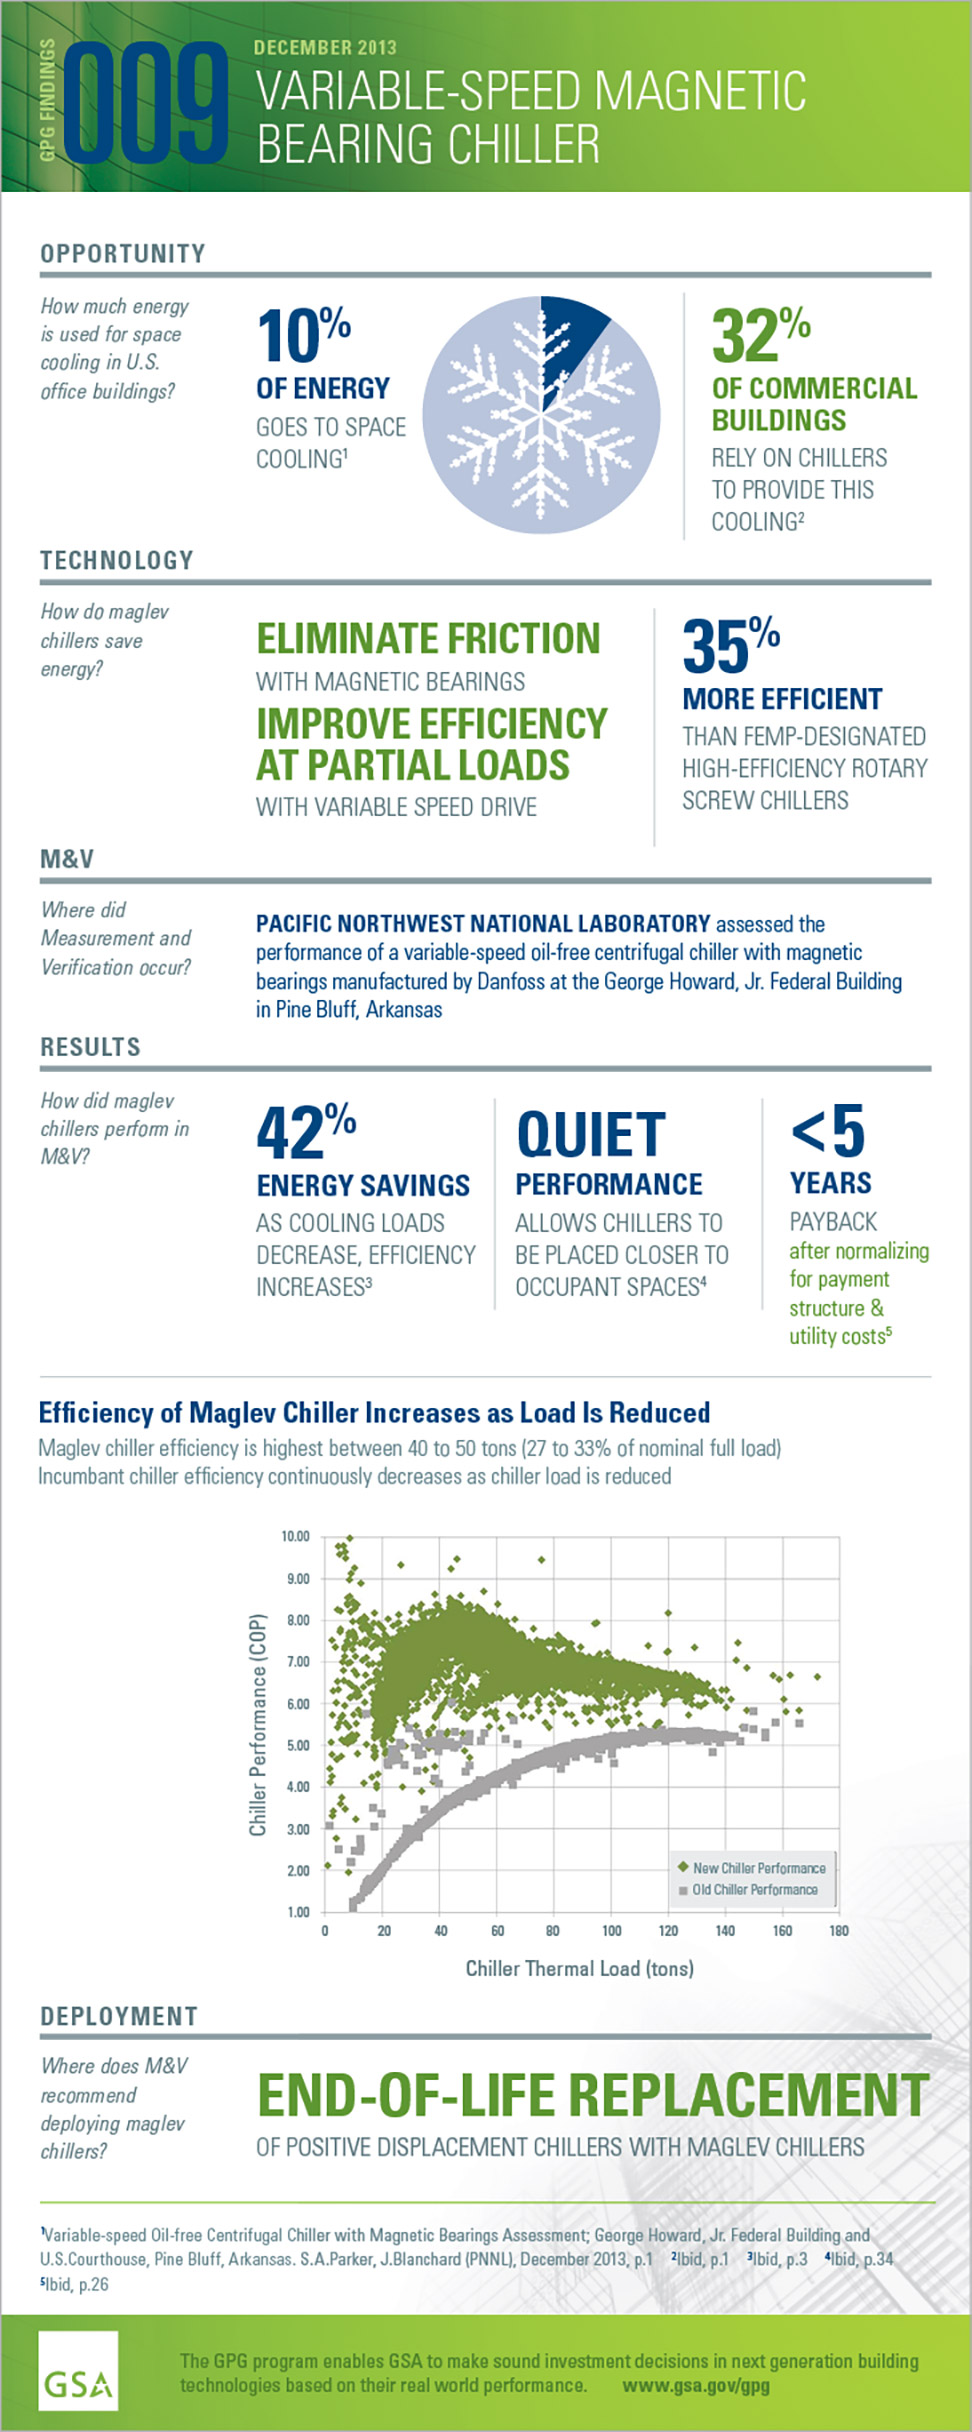 Download the PDF of the full-size infographic for GPG009 Variable-Speed Maglev Chiller.